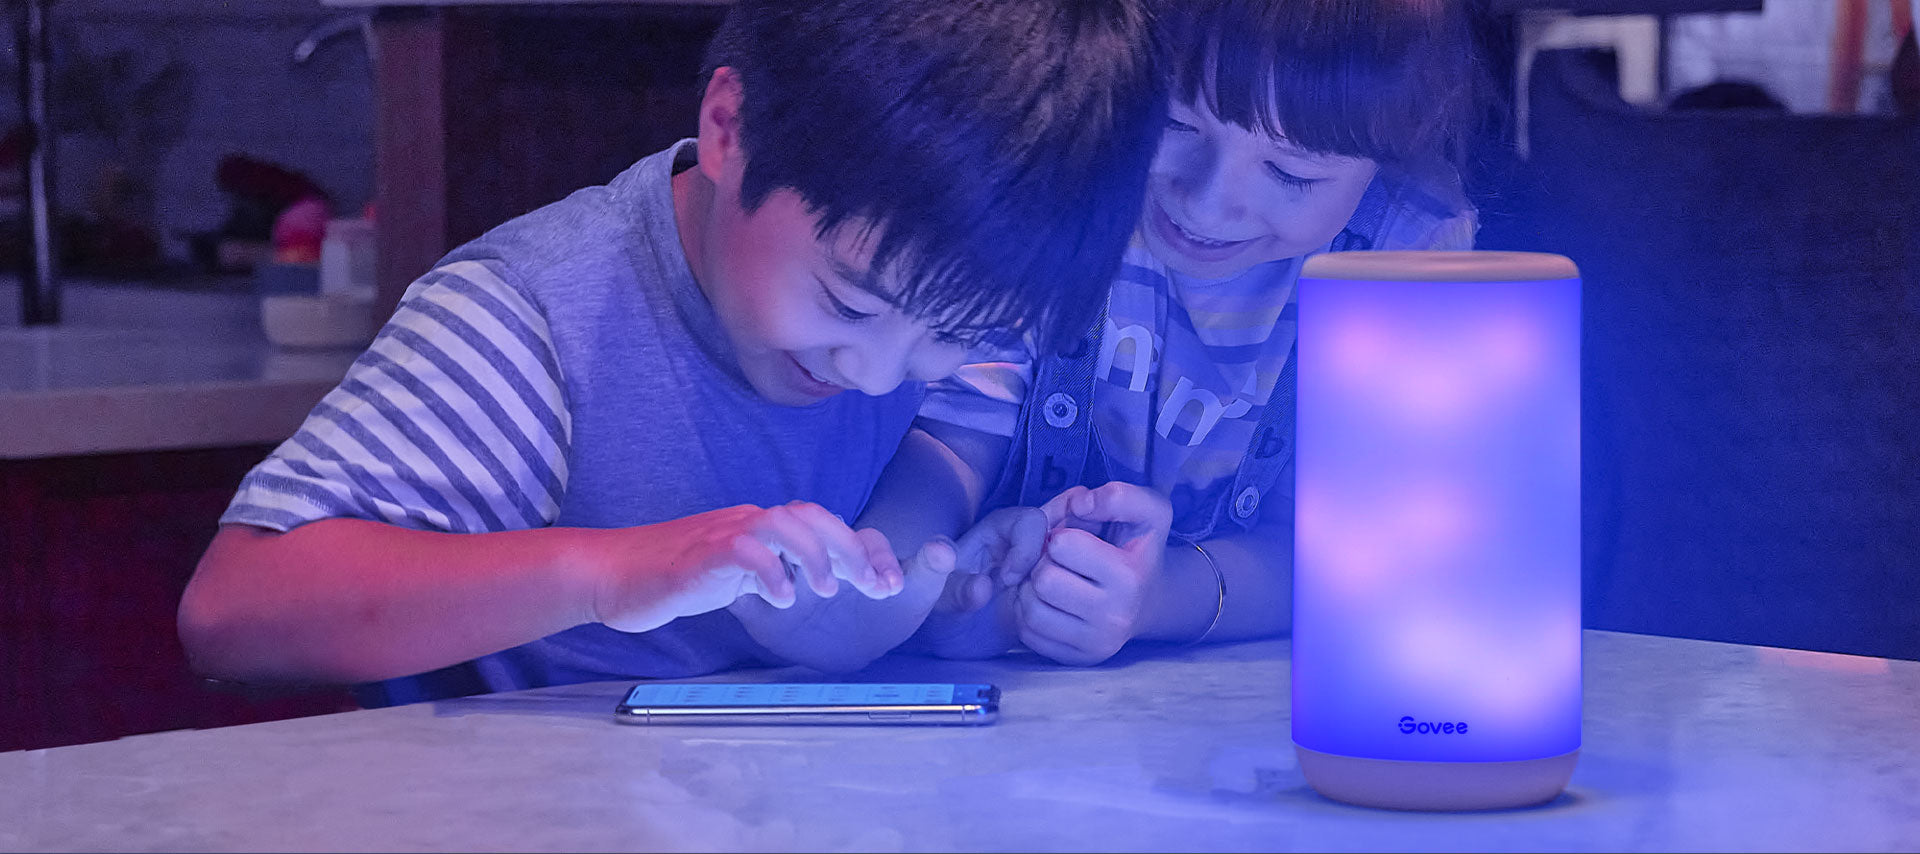 Govee Aura Smart App Controlled Table Lamp